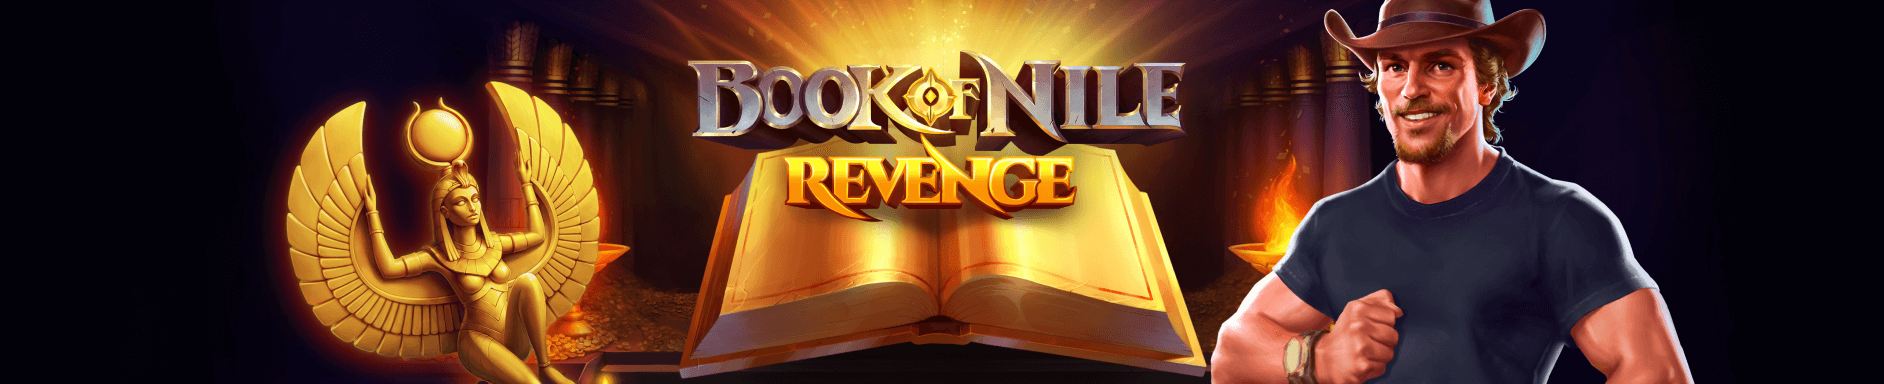 Netgame diversified growing portfolio with well-known Book of Nile: Revenge